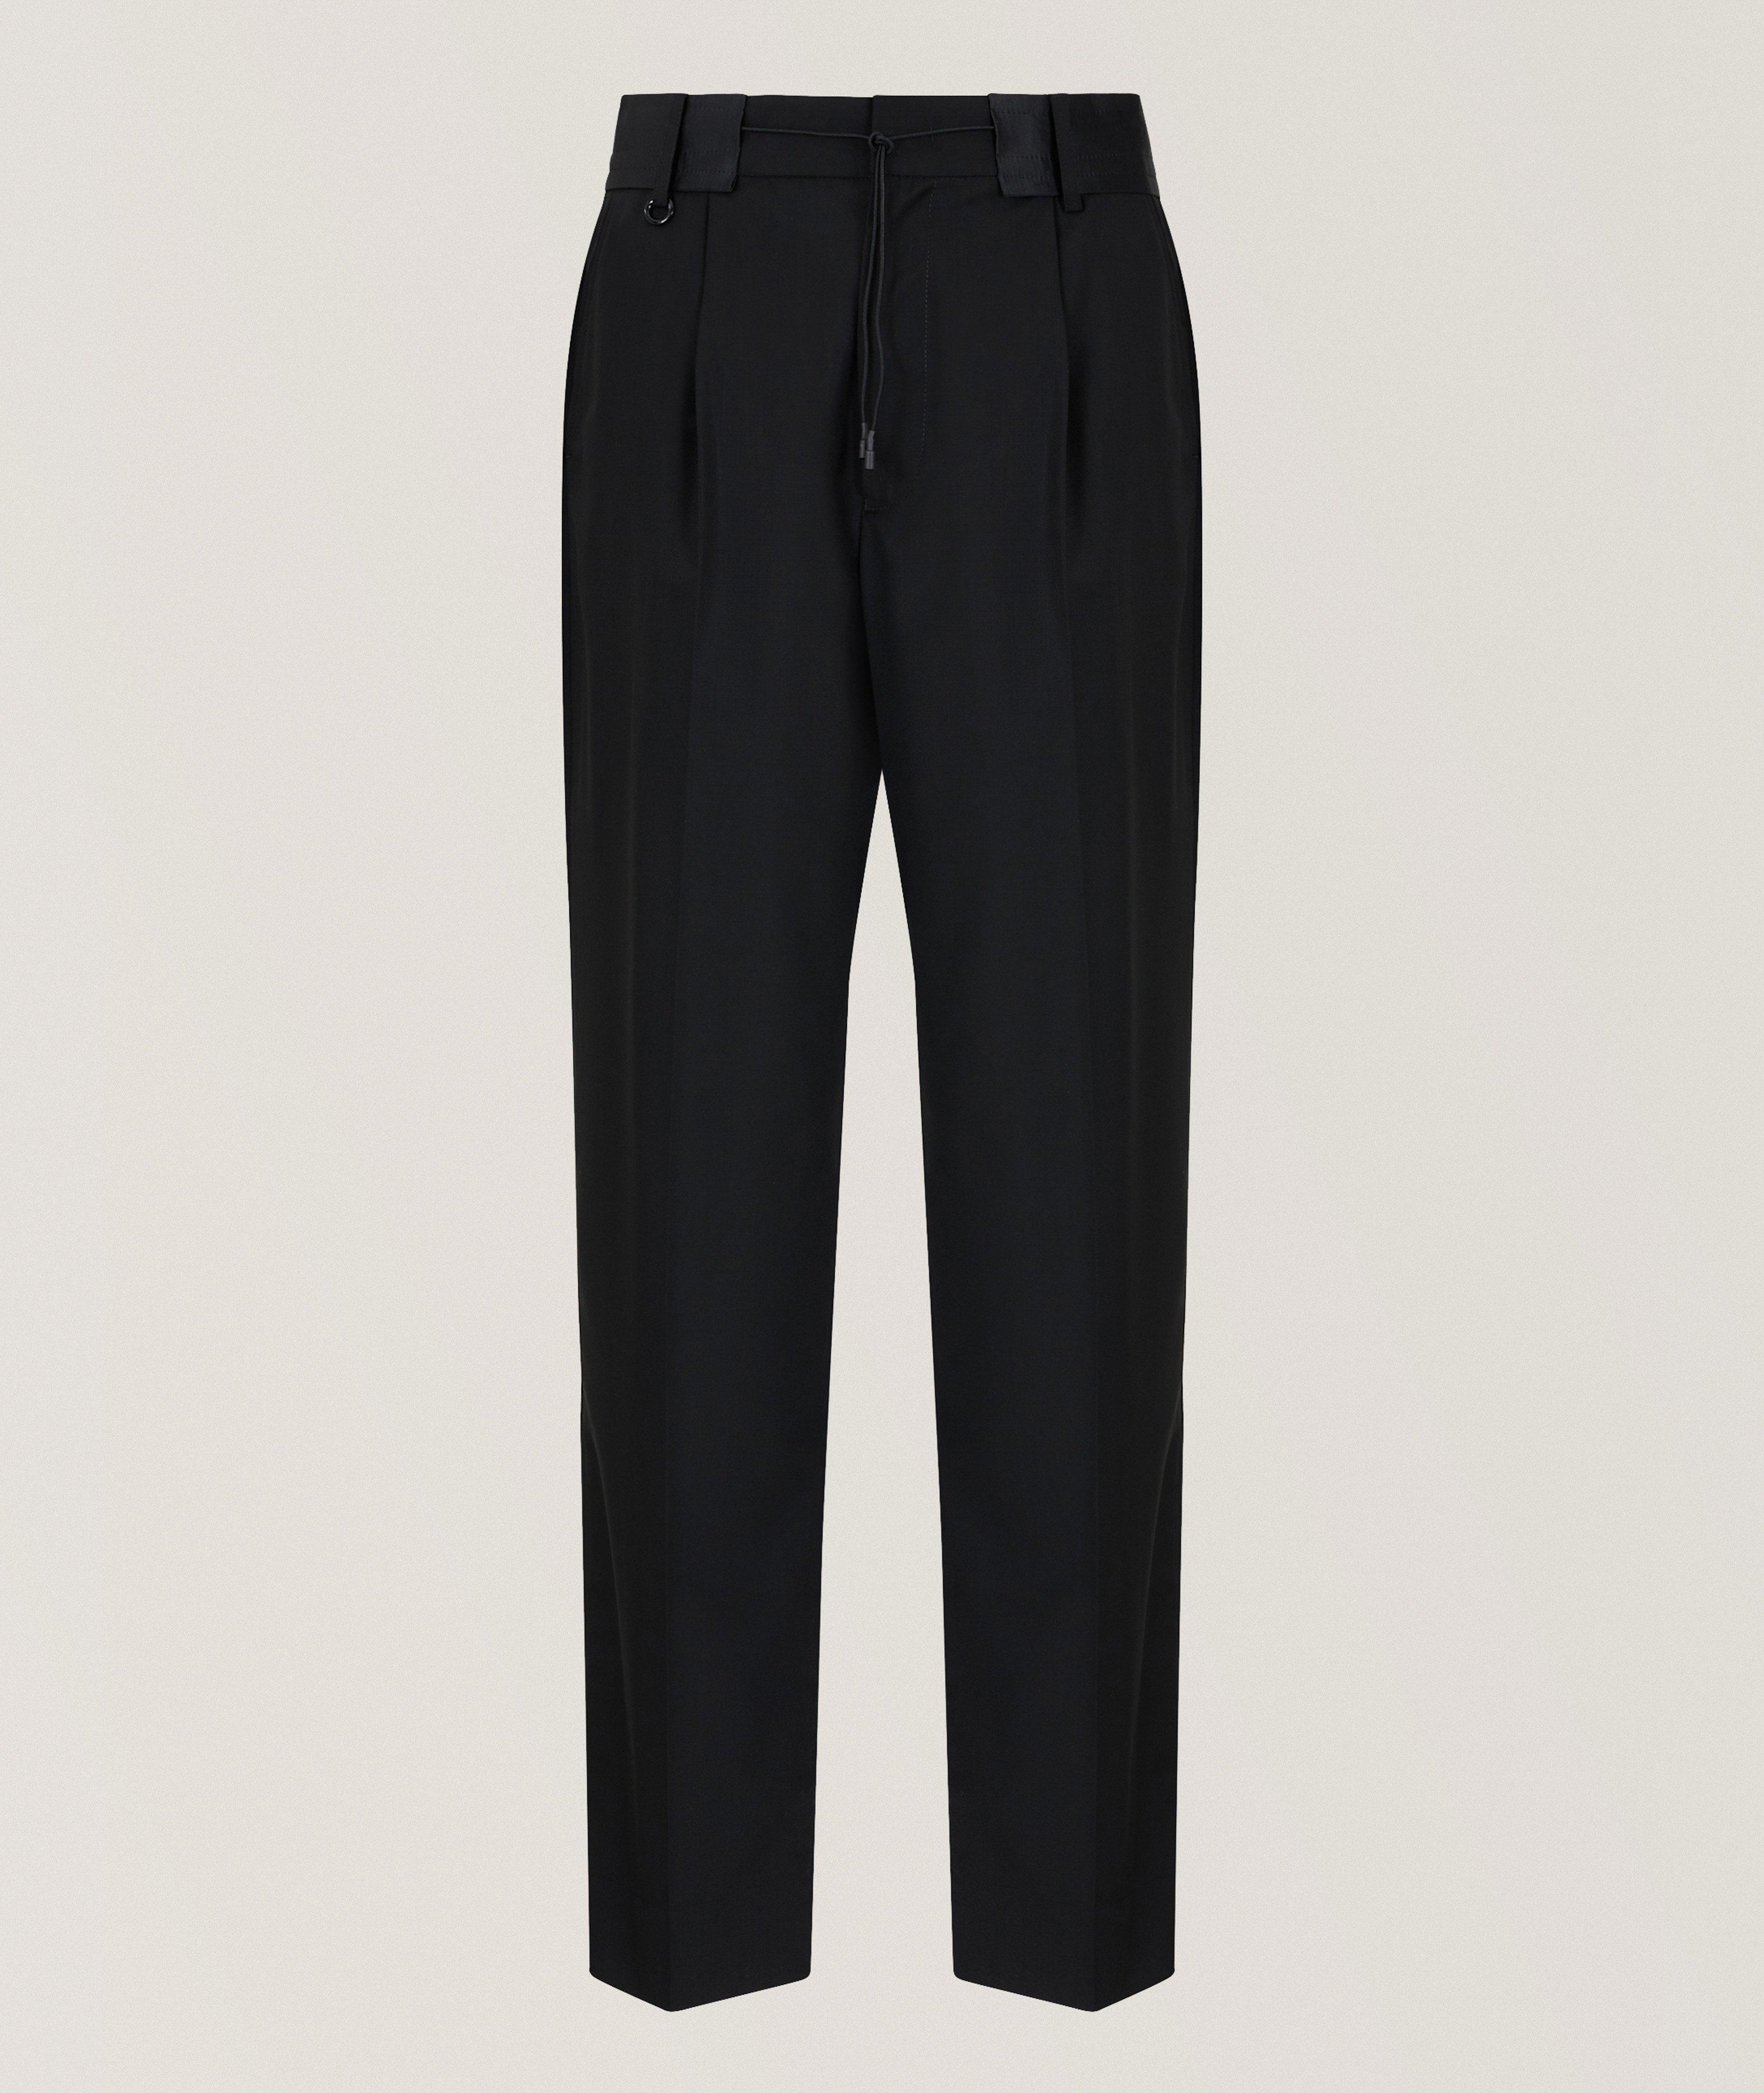 Gebr luxe formal pants || Westery Fashion House